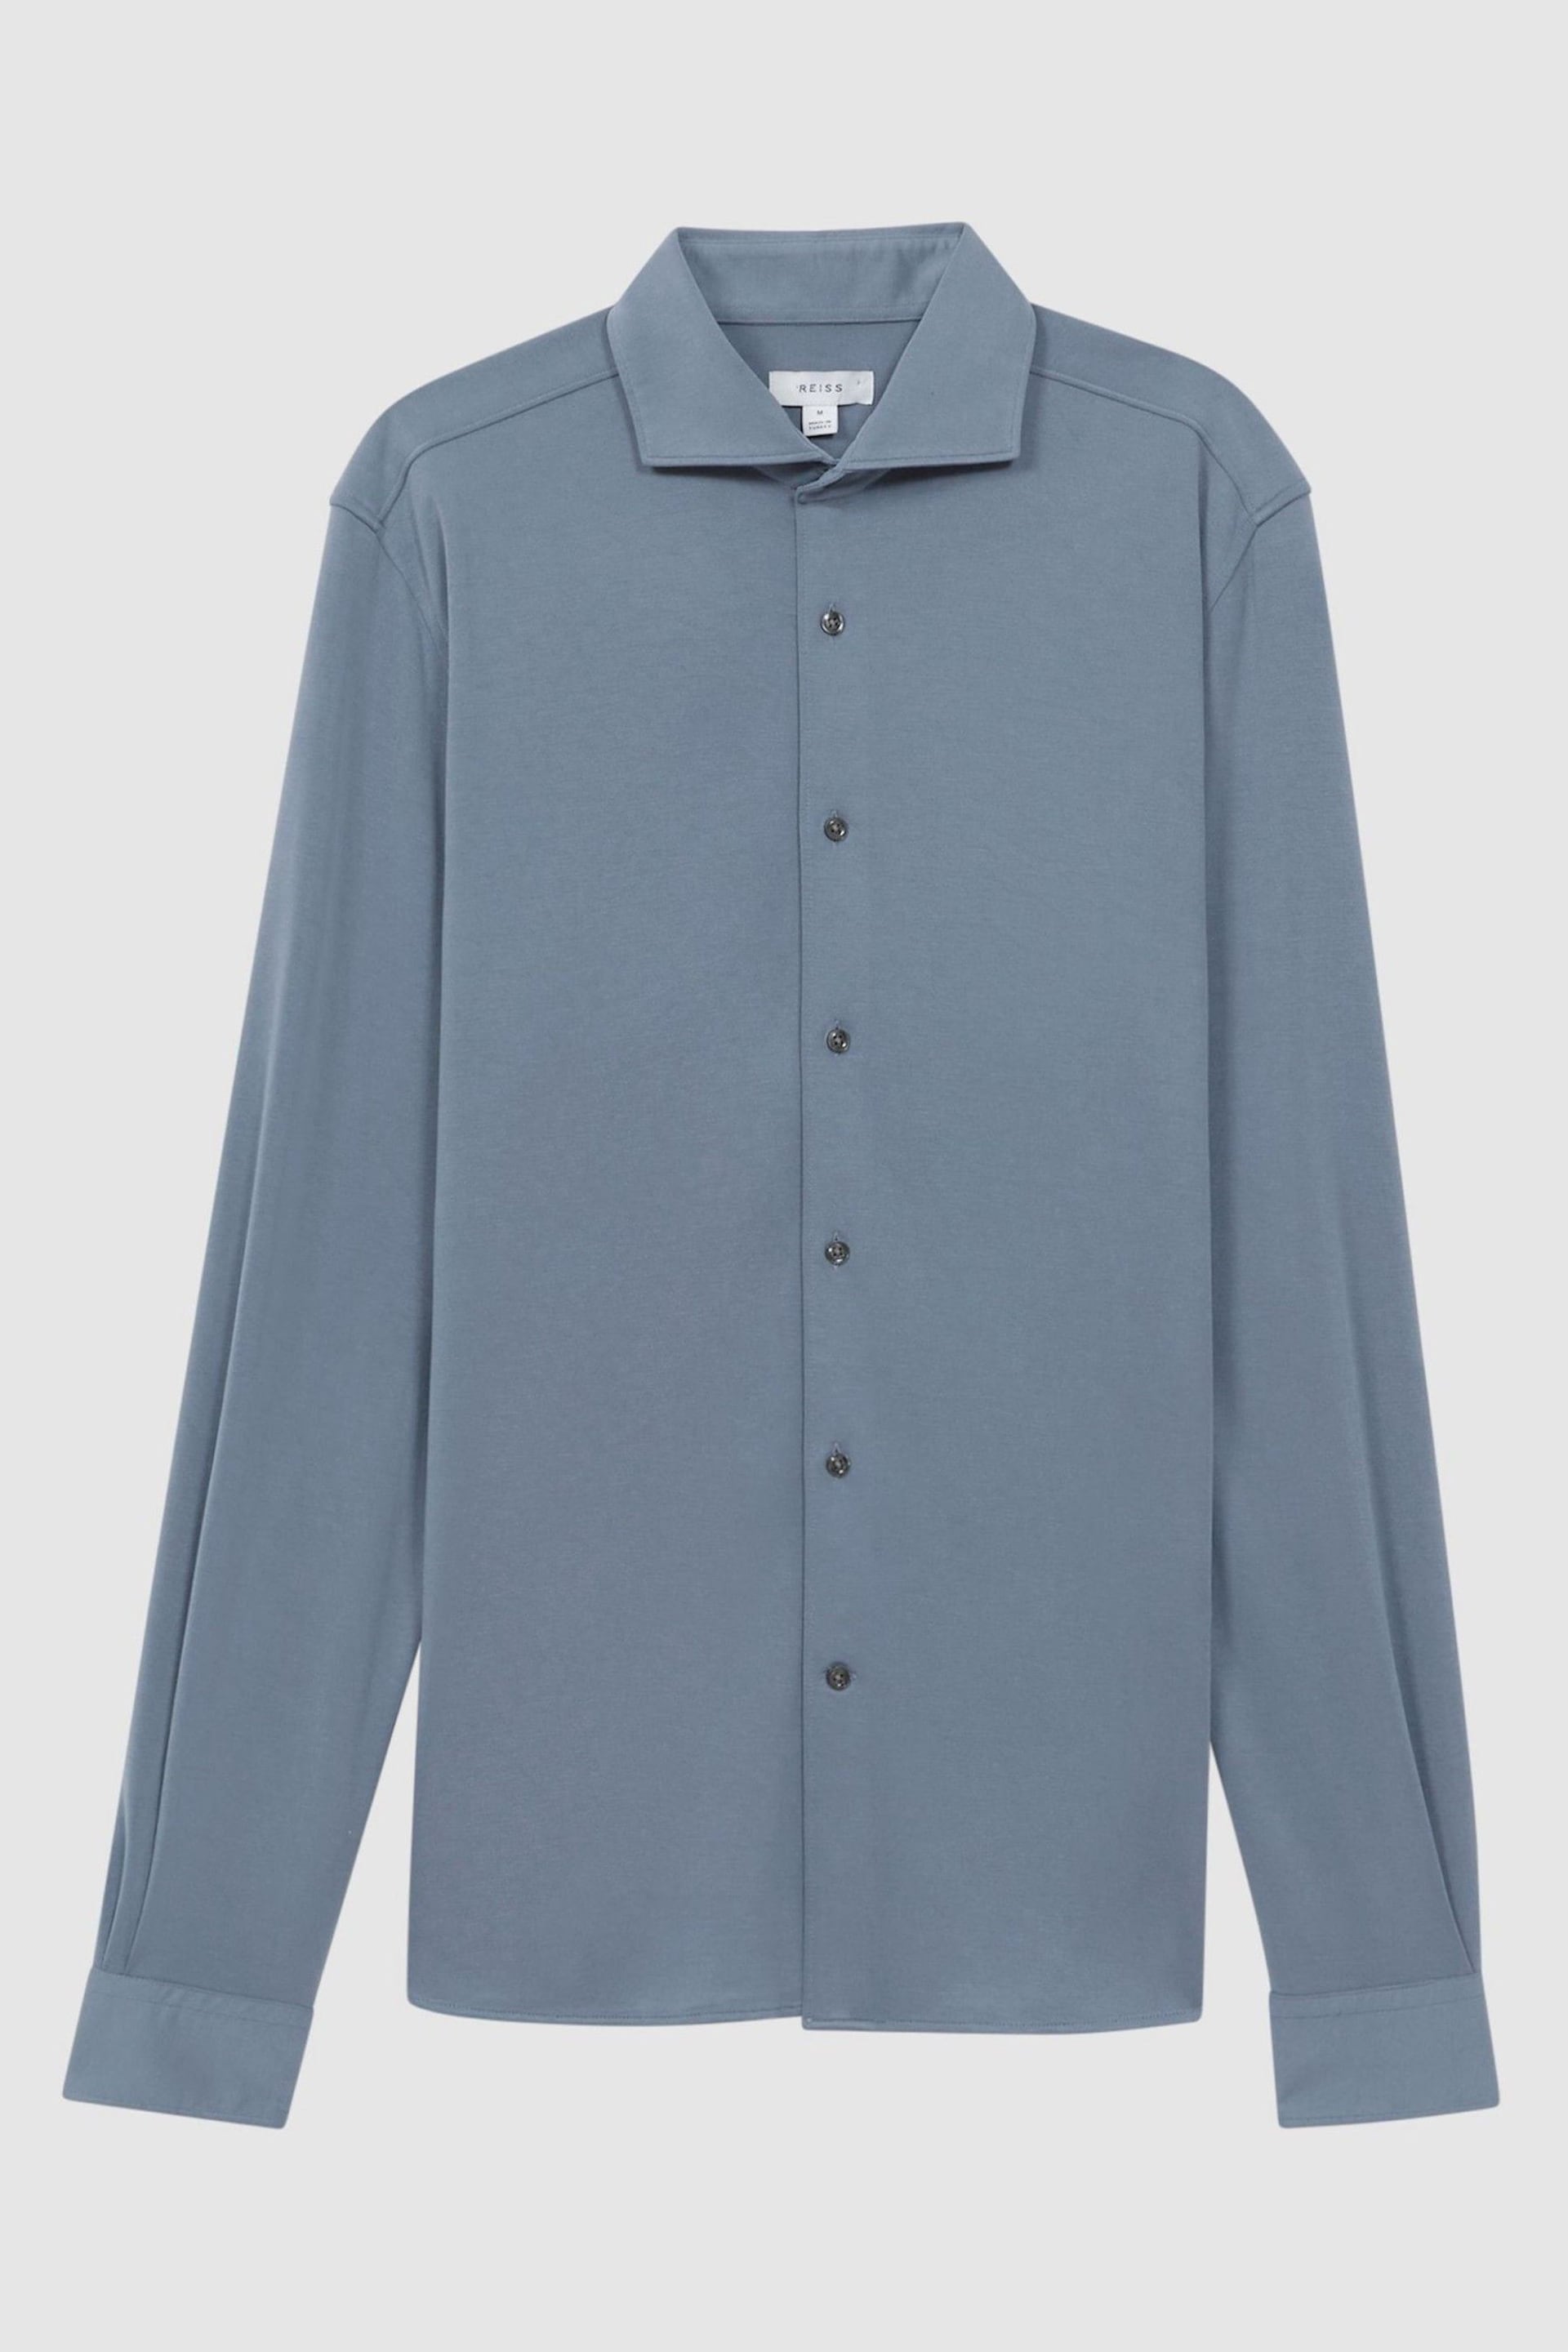 Reiss Airforce Blue Bobby Slim Fit Cutaway Collar Modal Shirt - Image 2 of 5